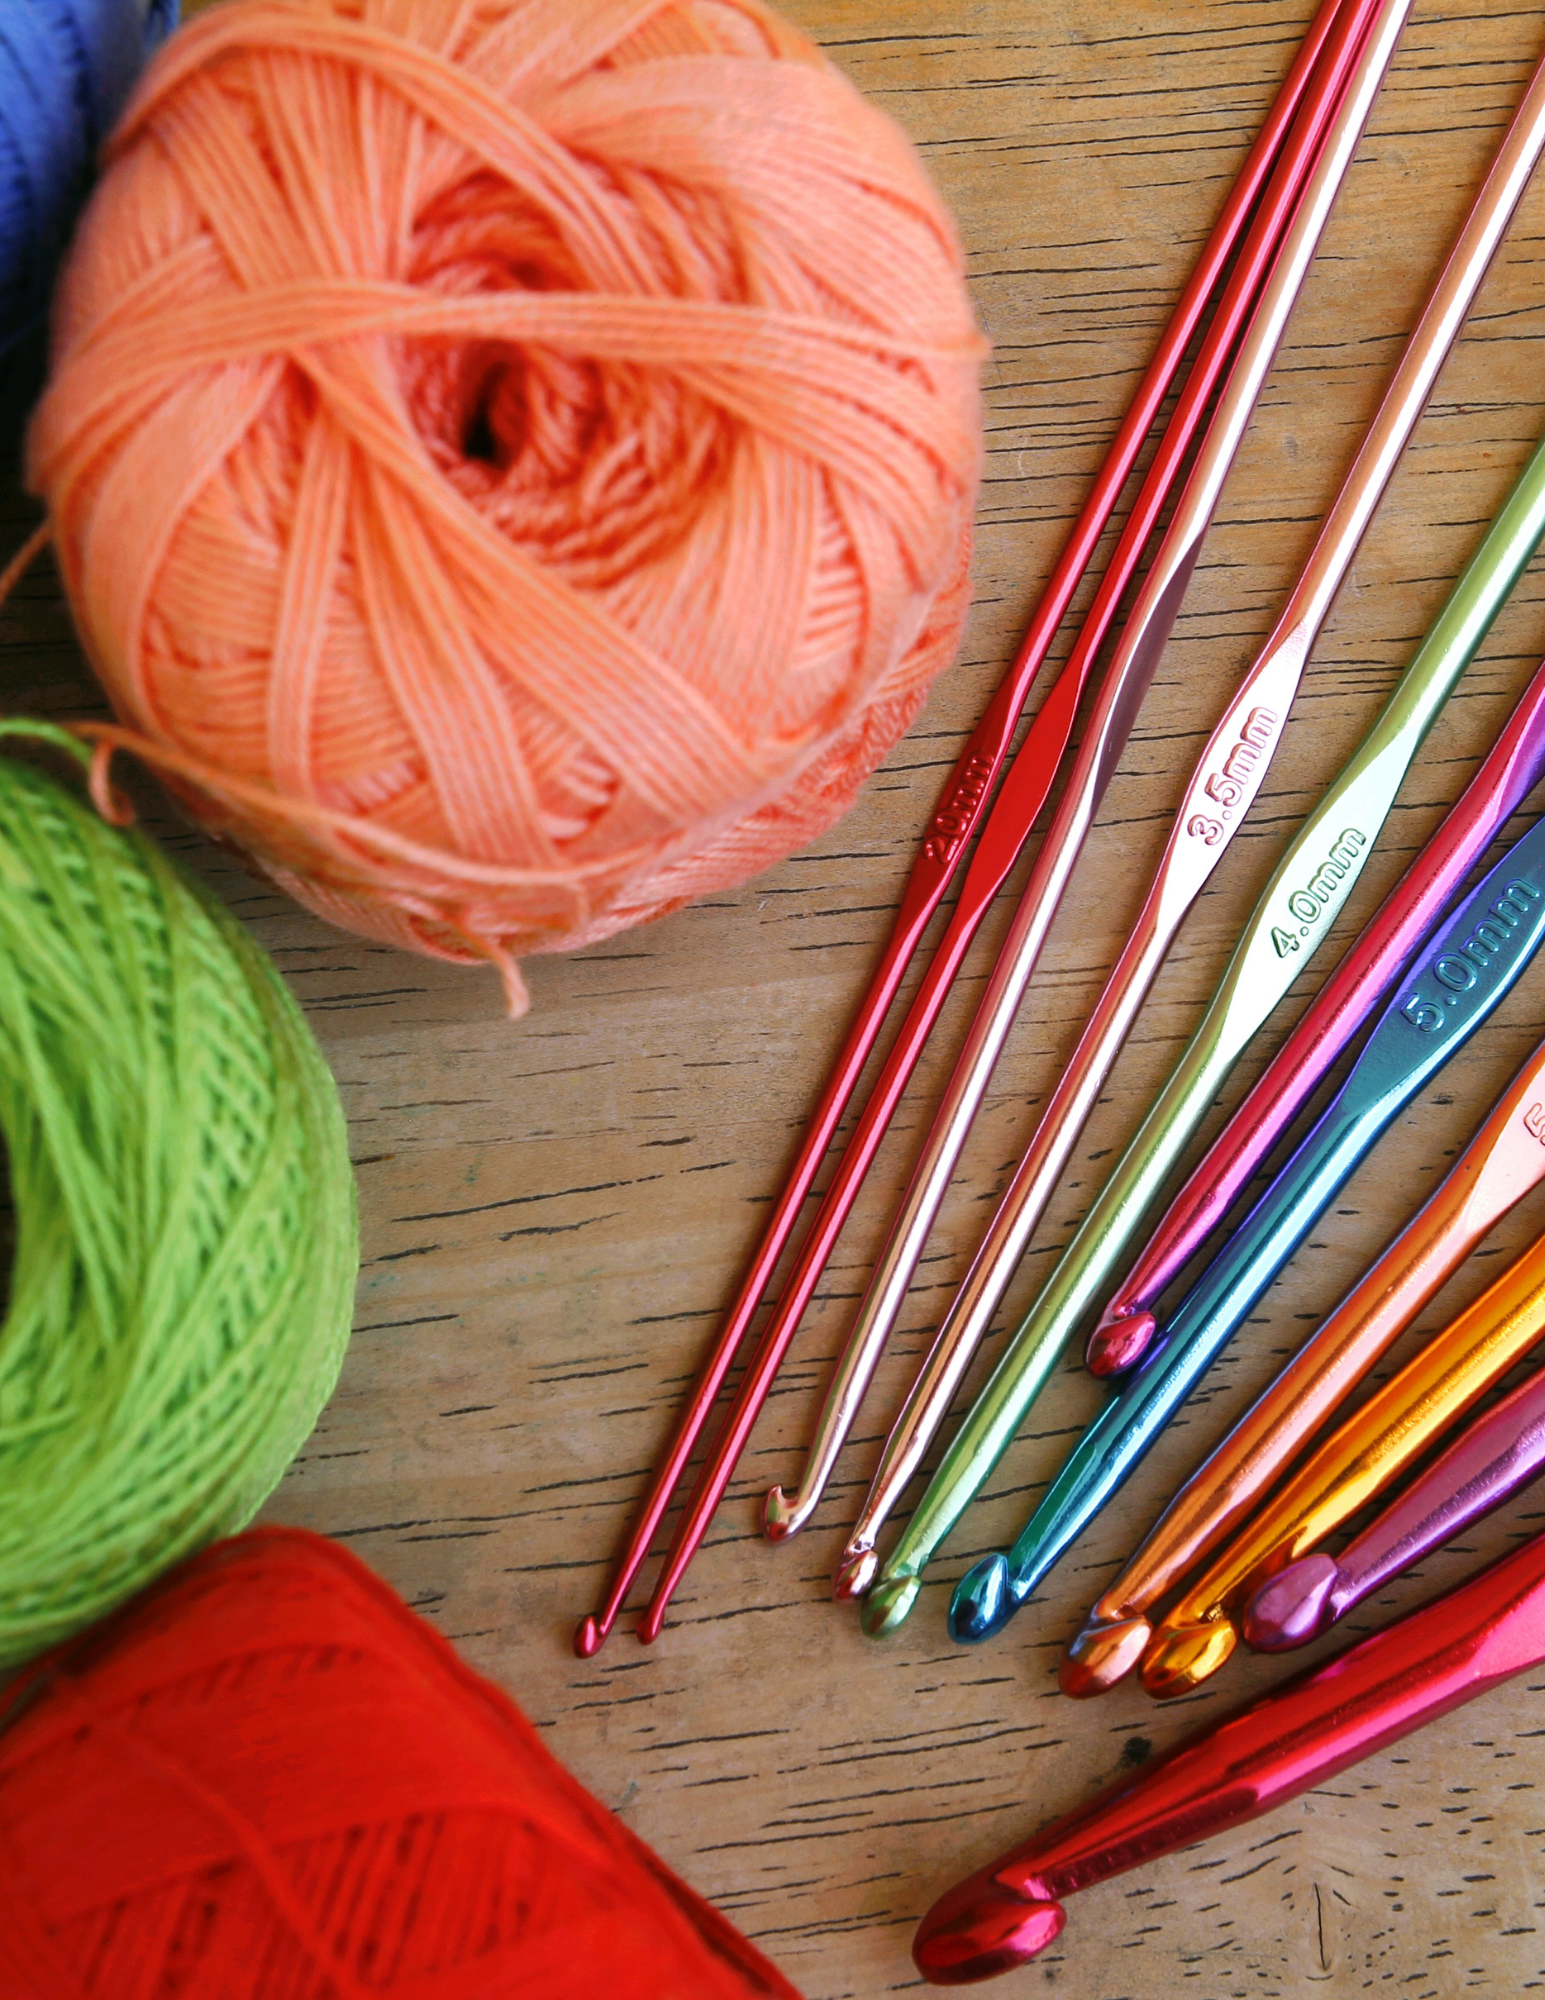 three skeins of yarn, 11 colorful crochet hooks to the right